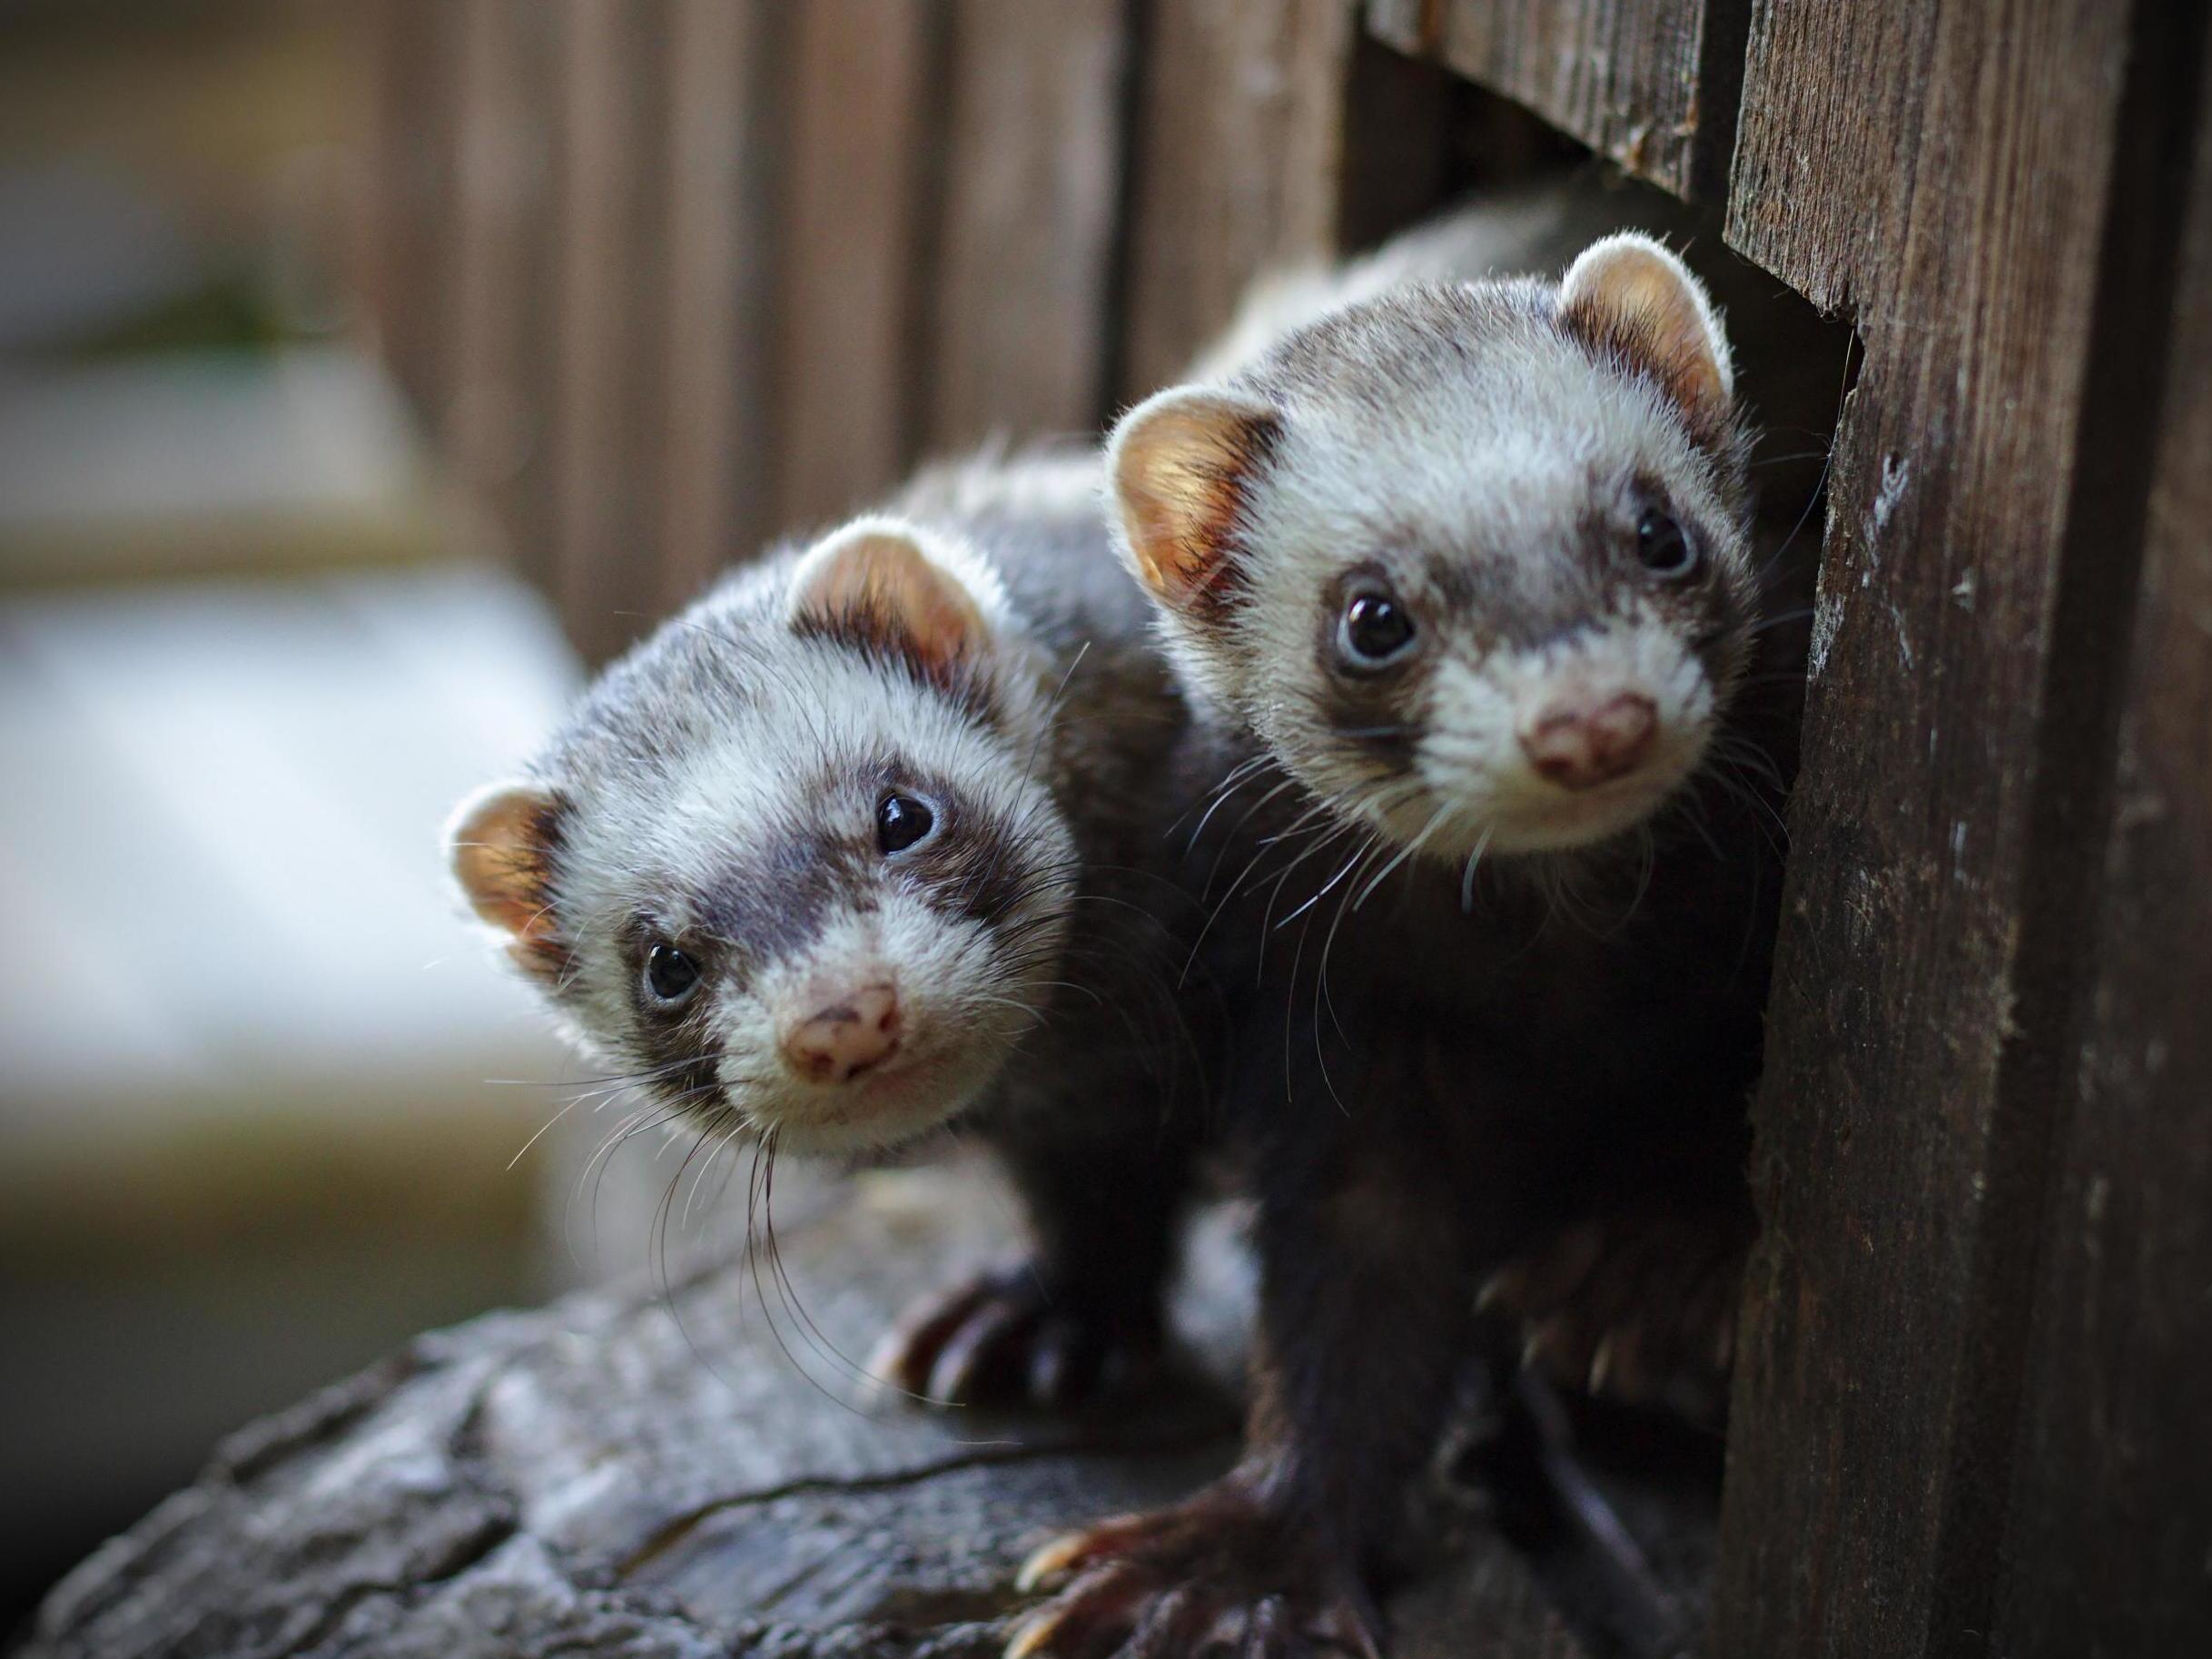 Man arrested after 'throwing ferrets at car' in Yorkshire